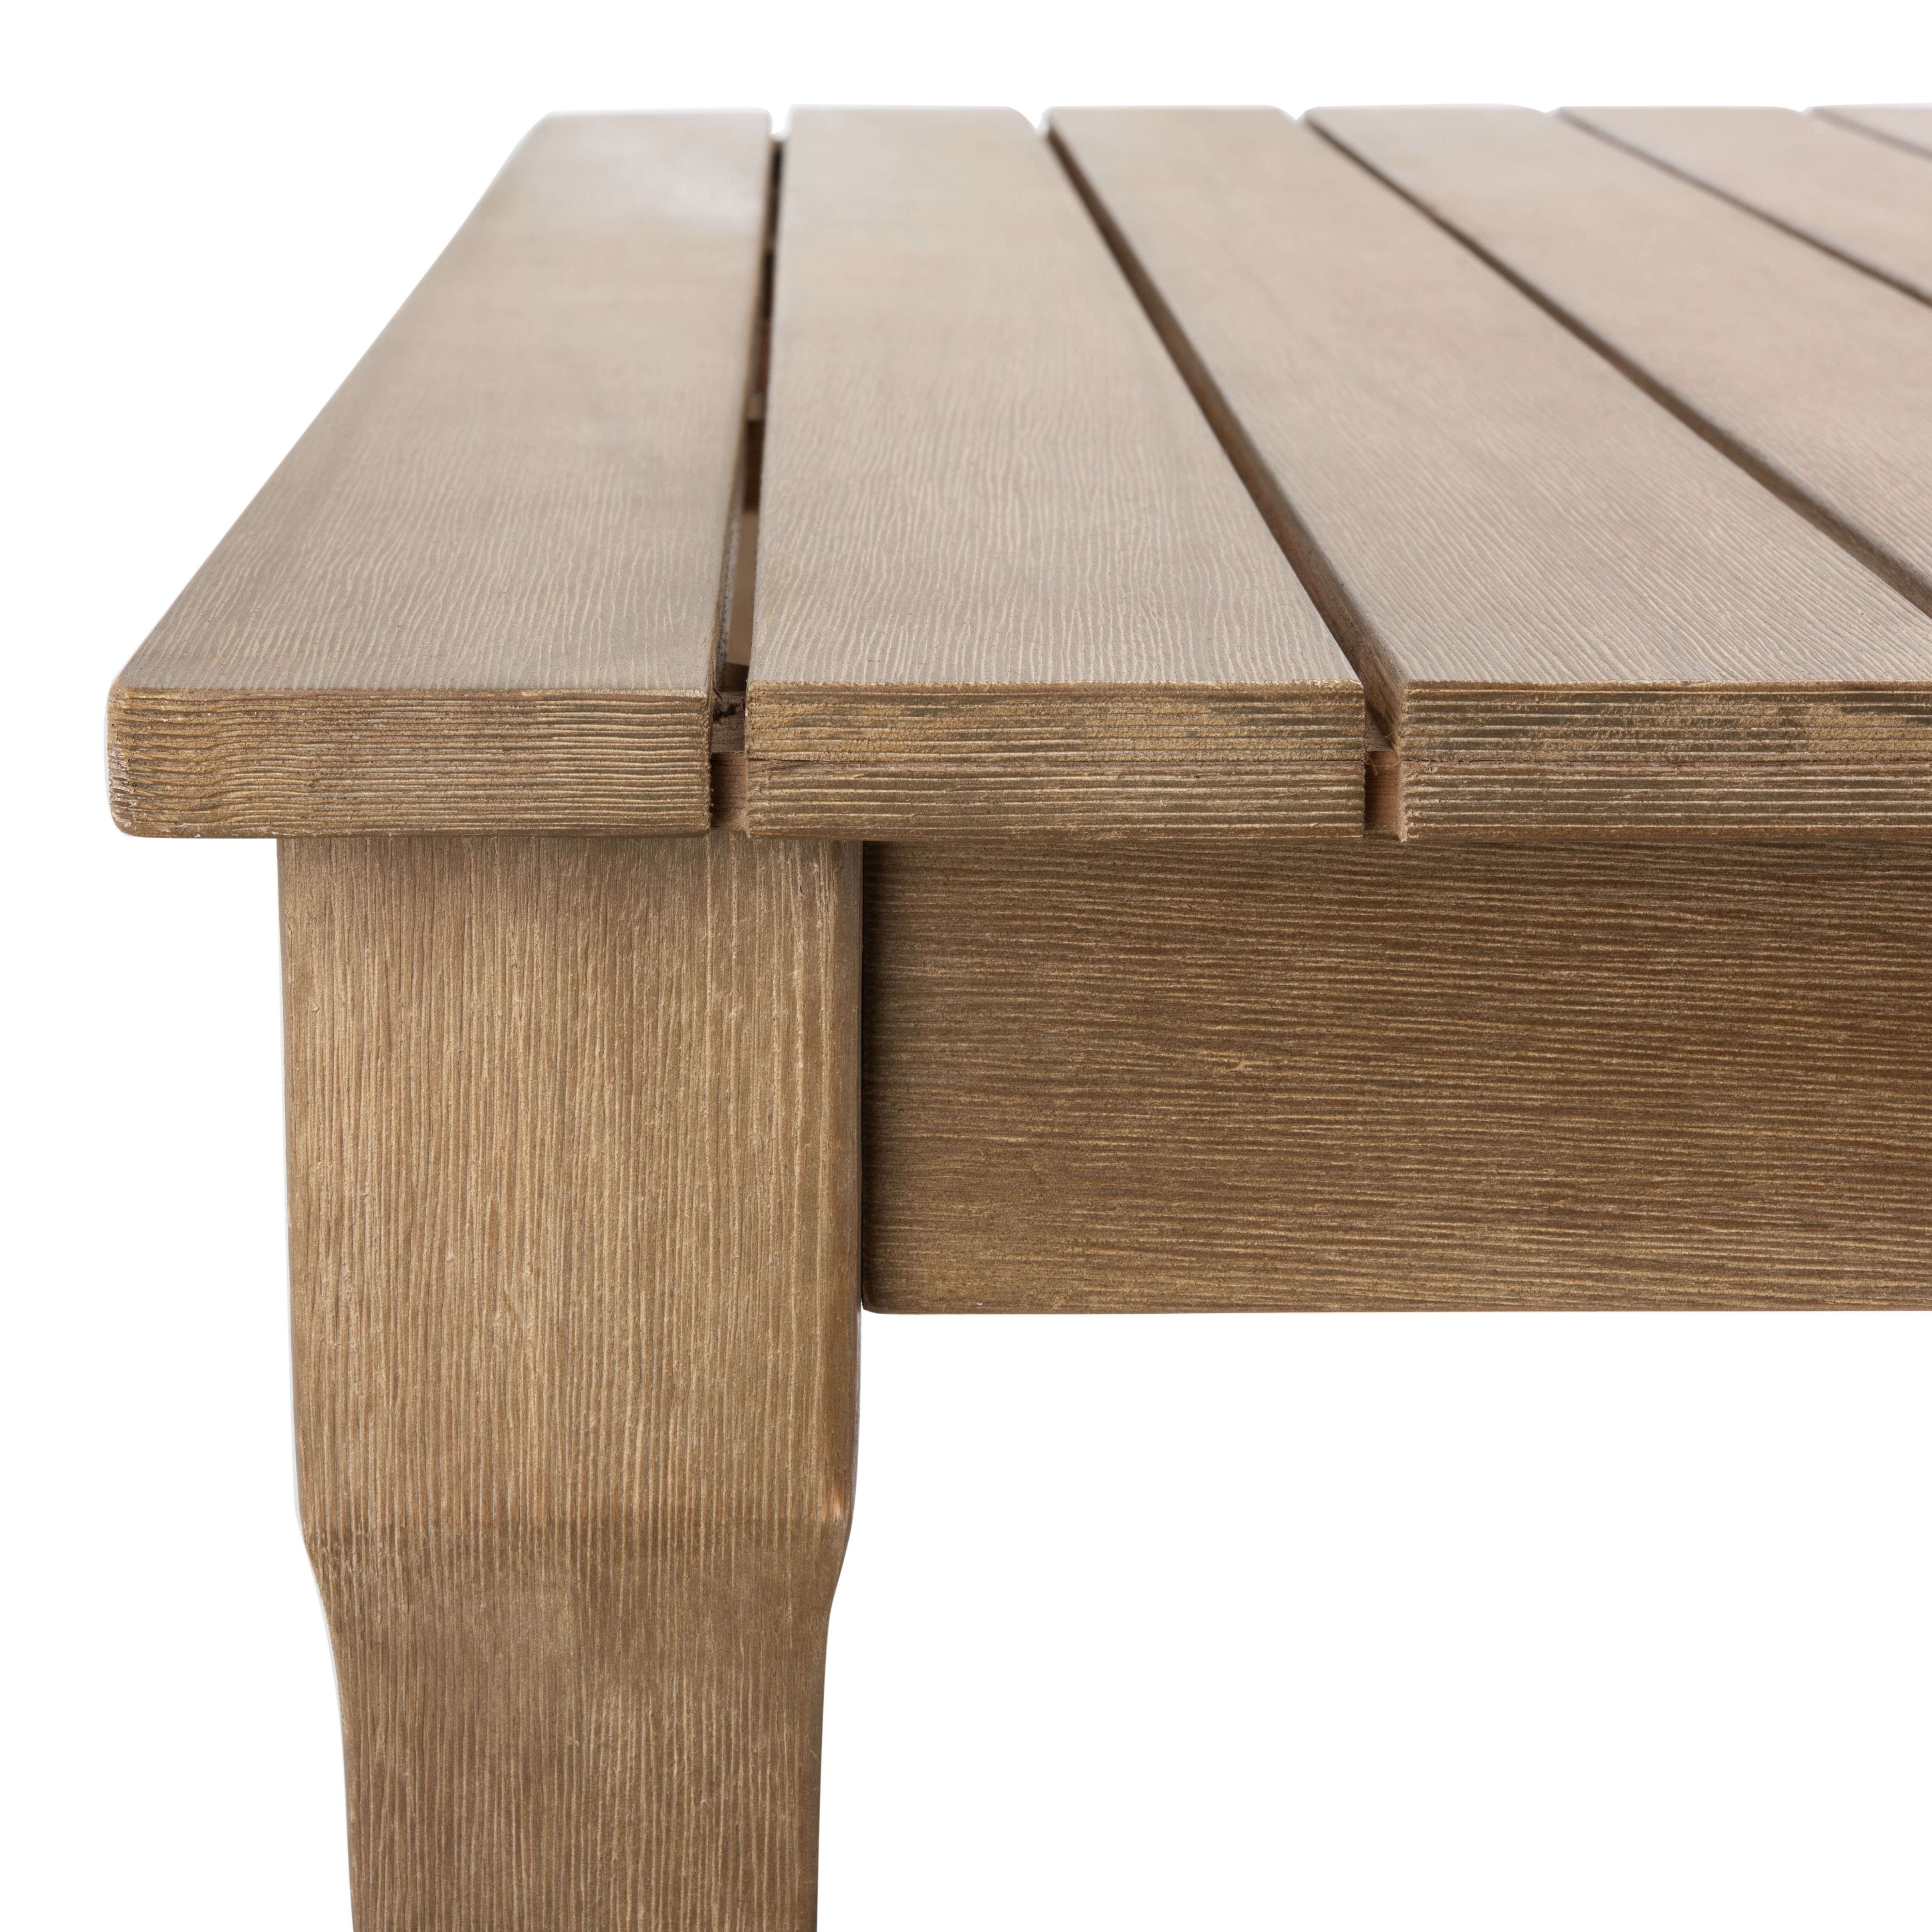 Dominica Wooden Outdoor Dining Table - Natural - Arlo Home - Image 7